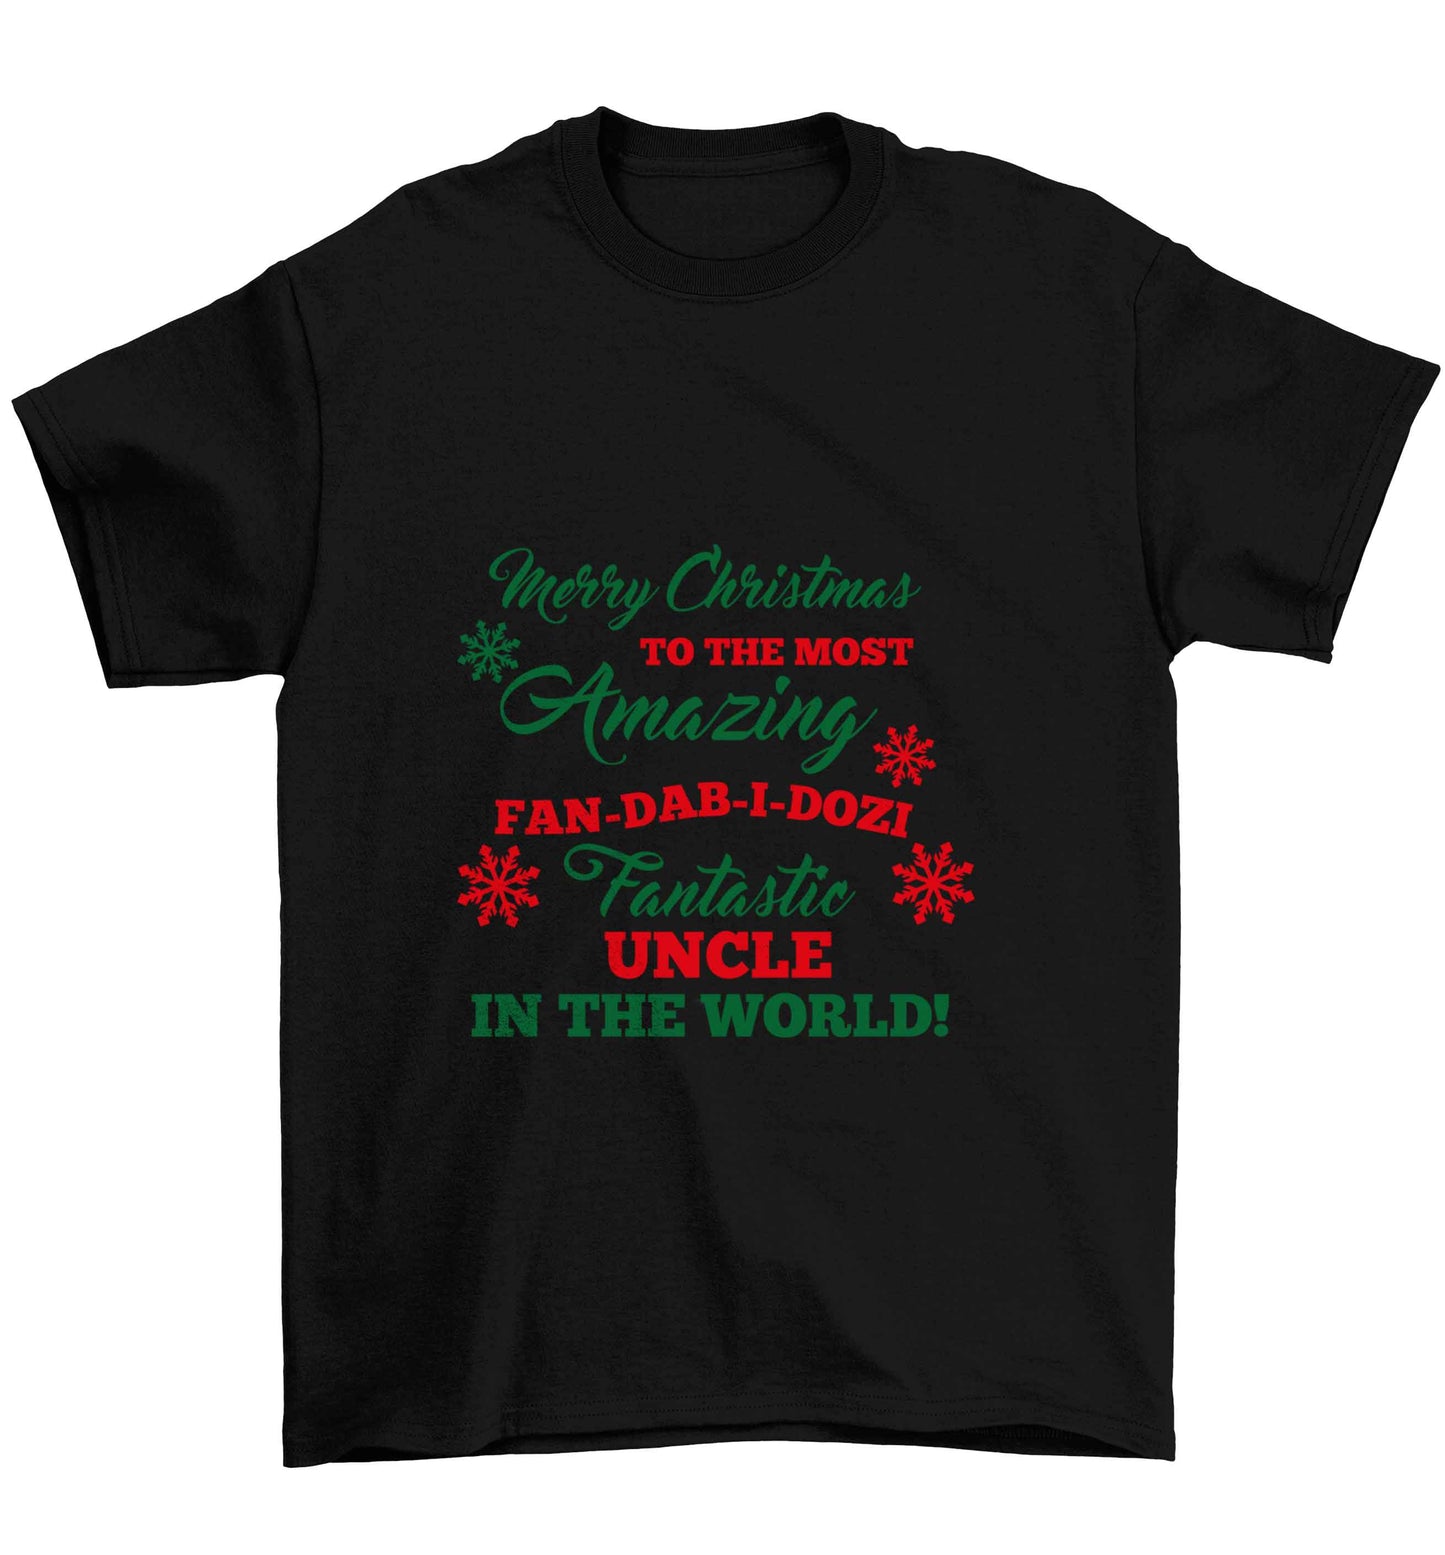 Merry Christmas to the most amazing fan-dab-i-dozi fantasic Uncle in the world Children's black Tshirt 12-13 Years